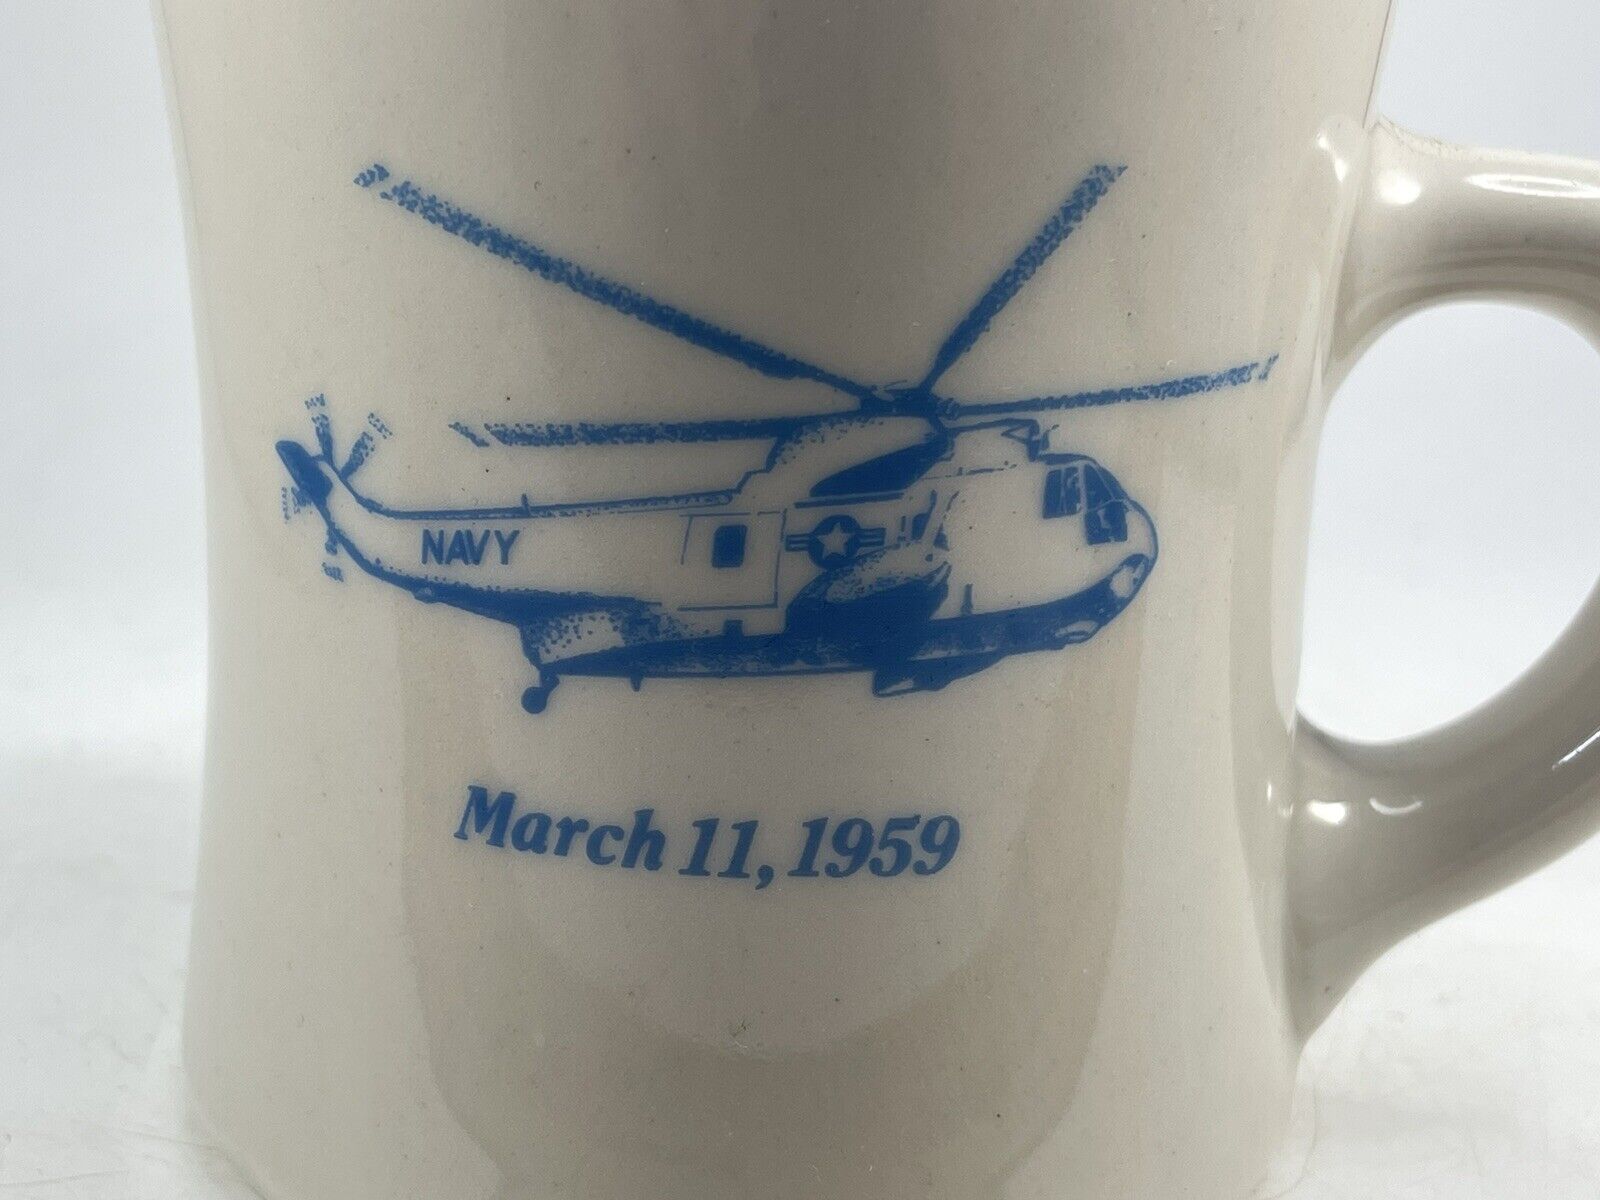 Sikorsky H-3 Navy Helicopter Aircraft March 1959 Coffee Mug Vintage